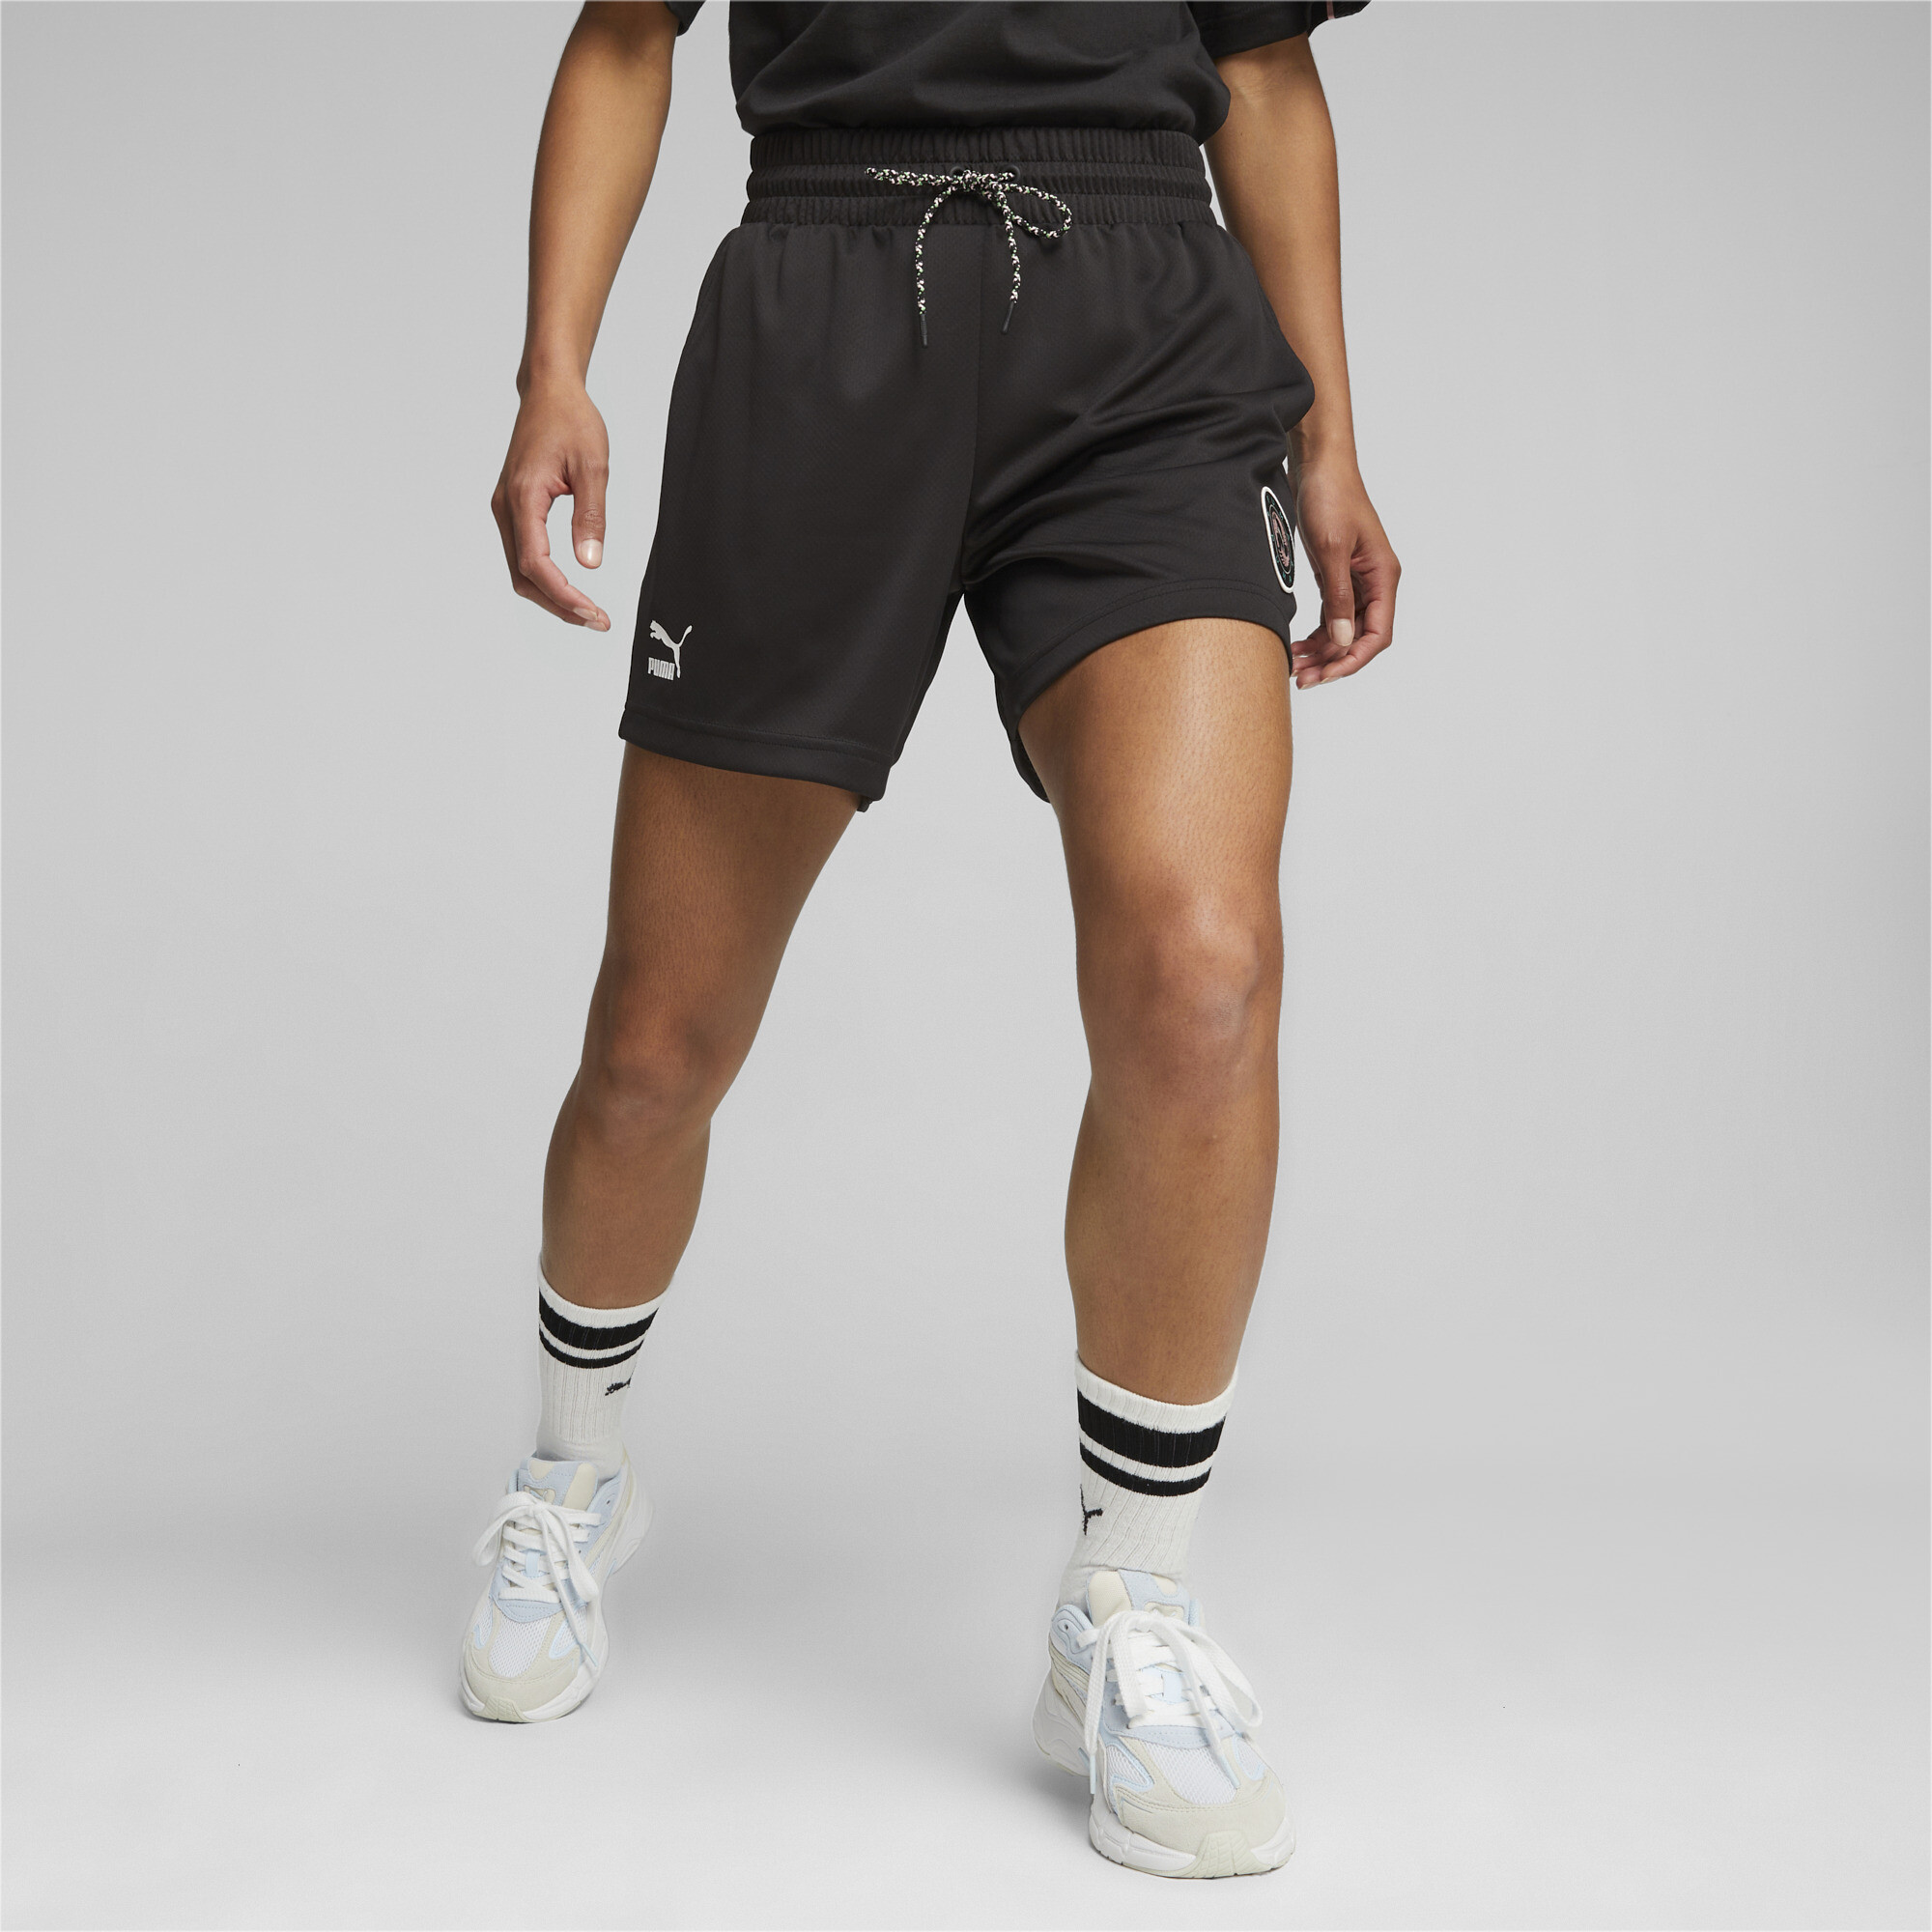 Women's PUMA Dare To Football Shorts In Black, Size Large